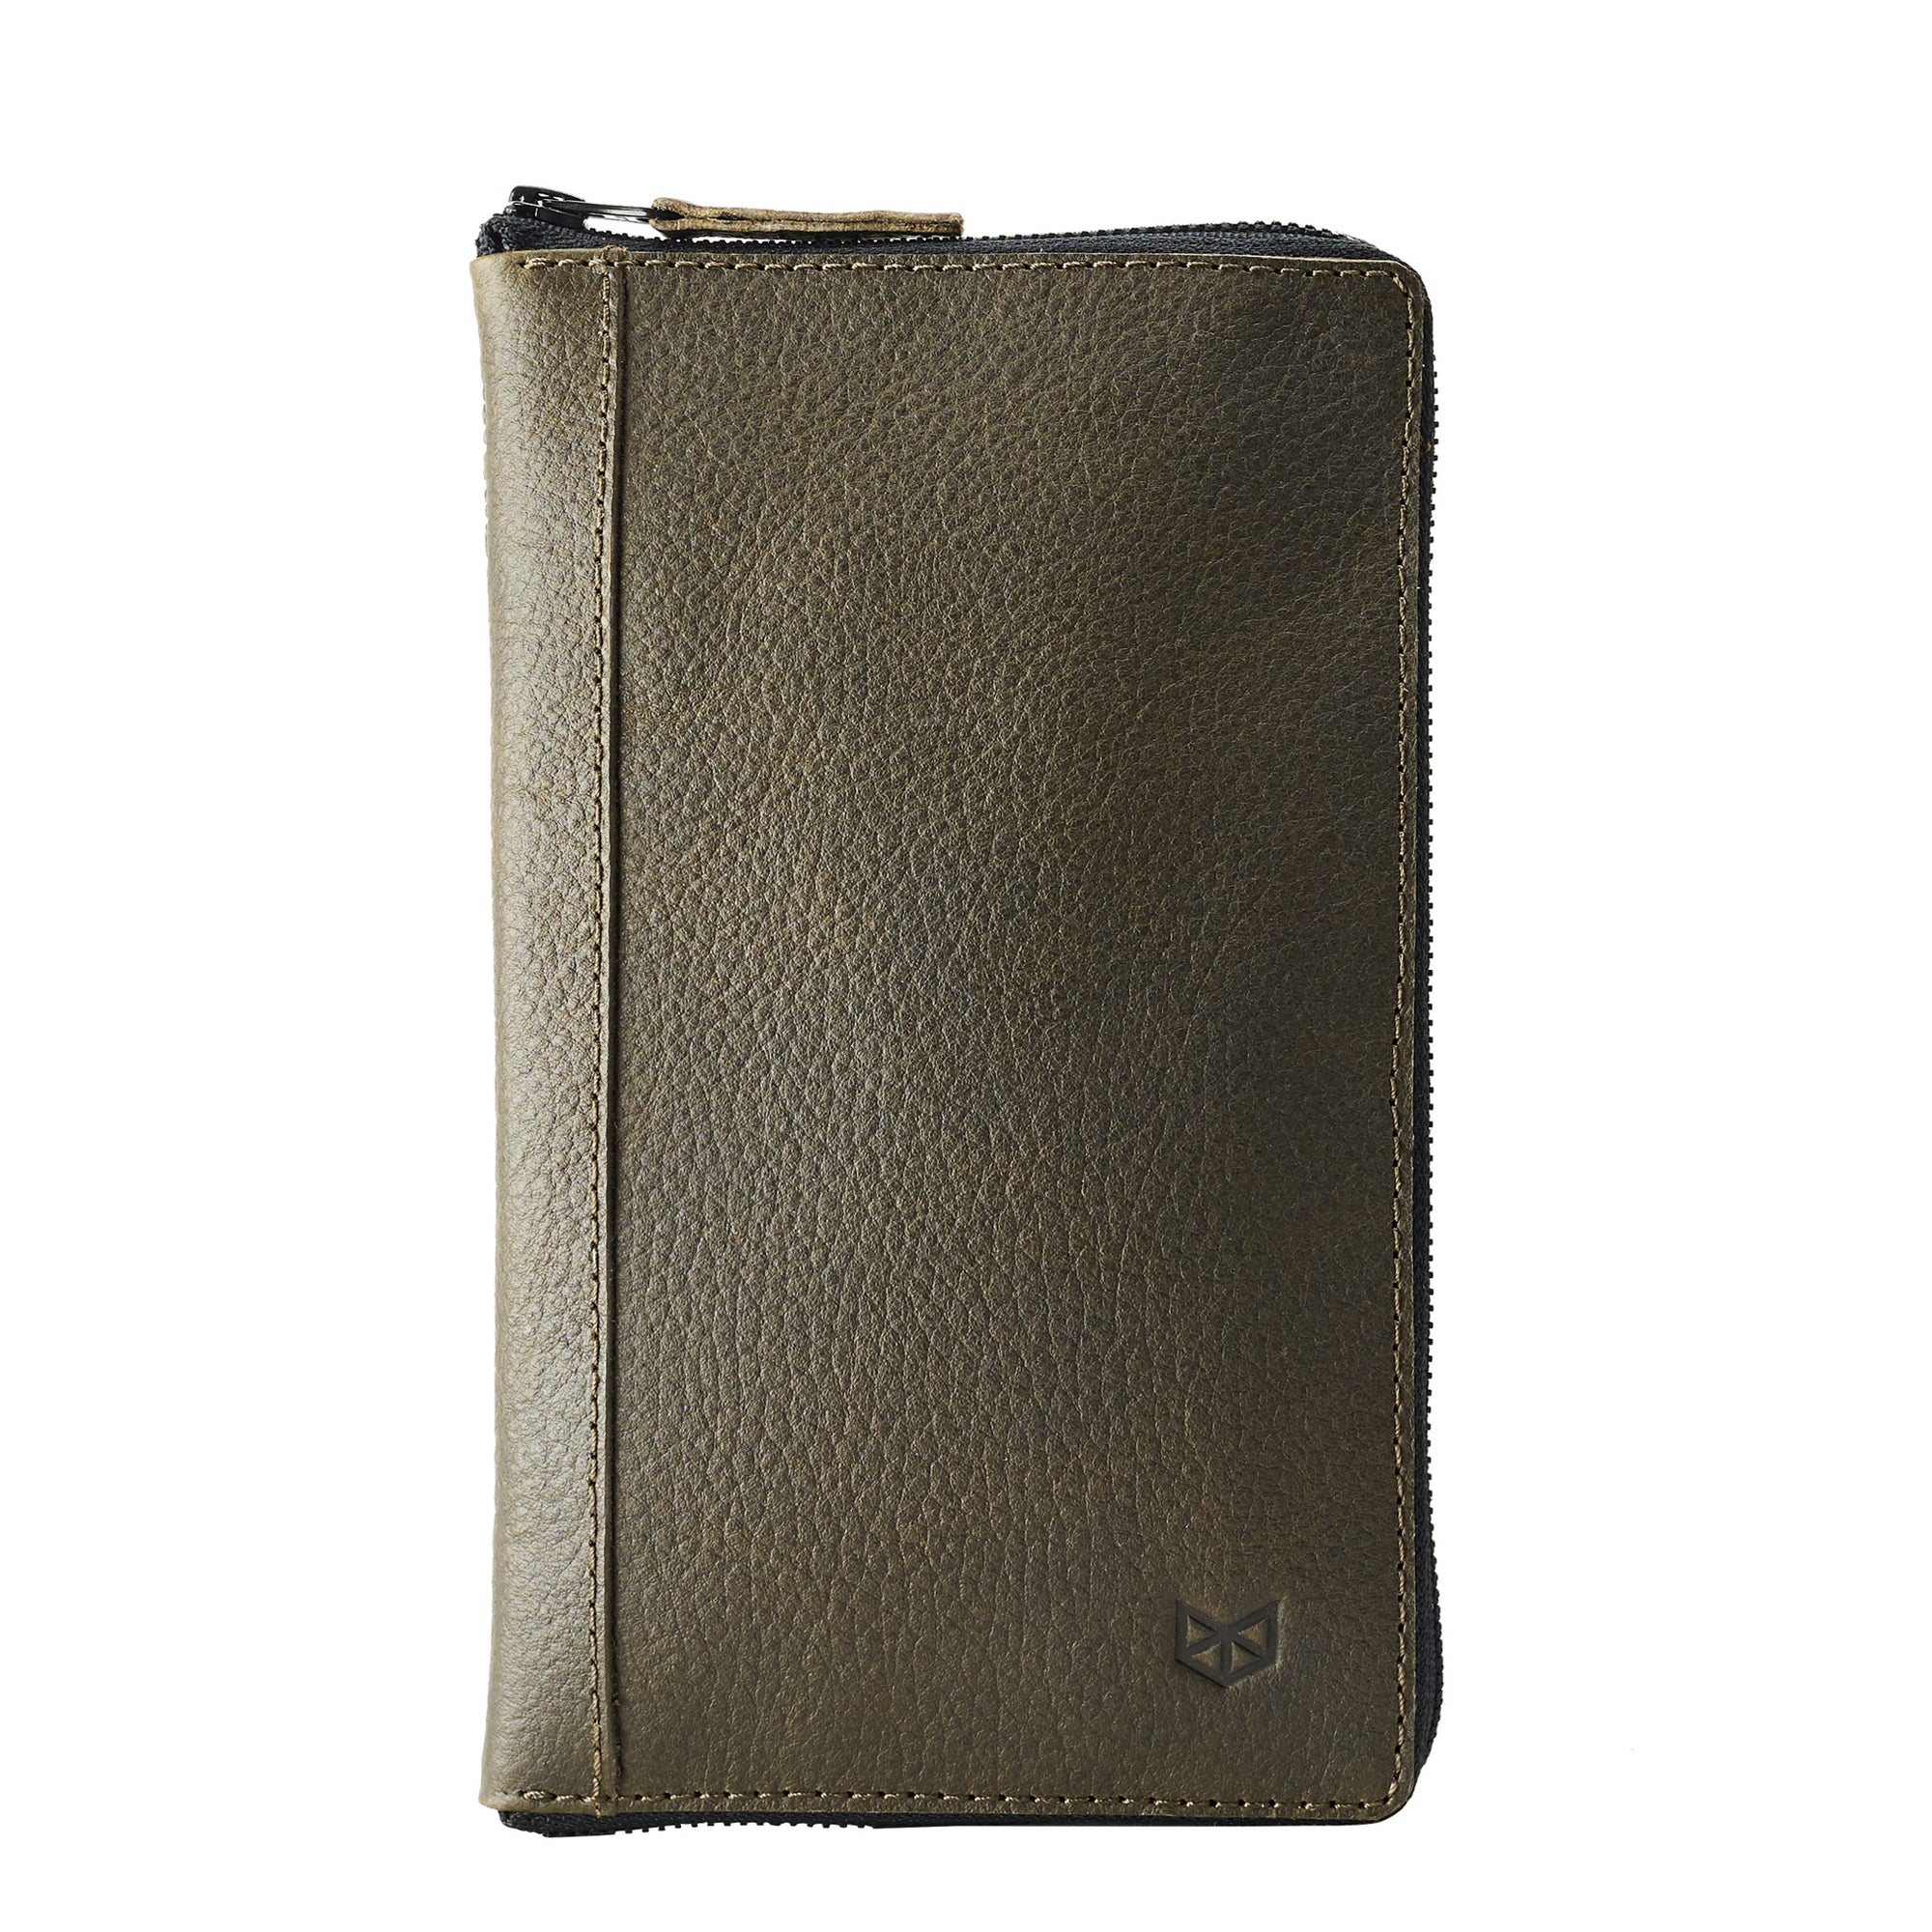 Front. Green Passport Holder for travelers, document organizer, travel journal by Capra Leather